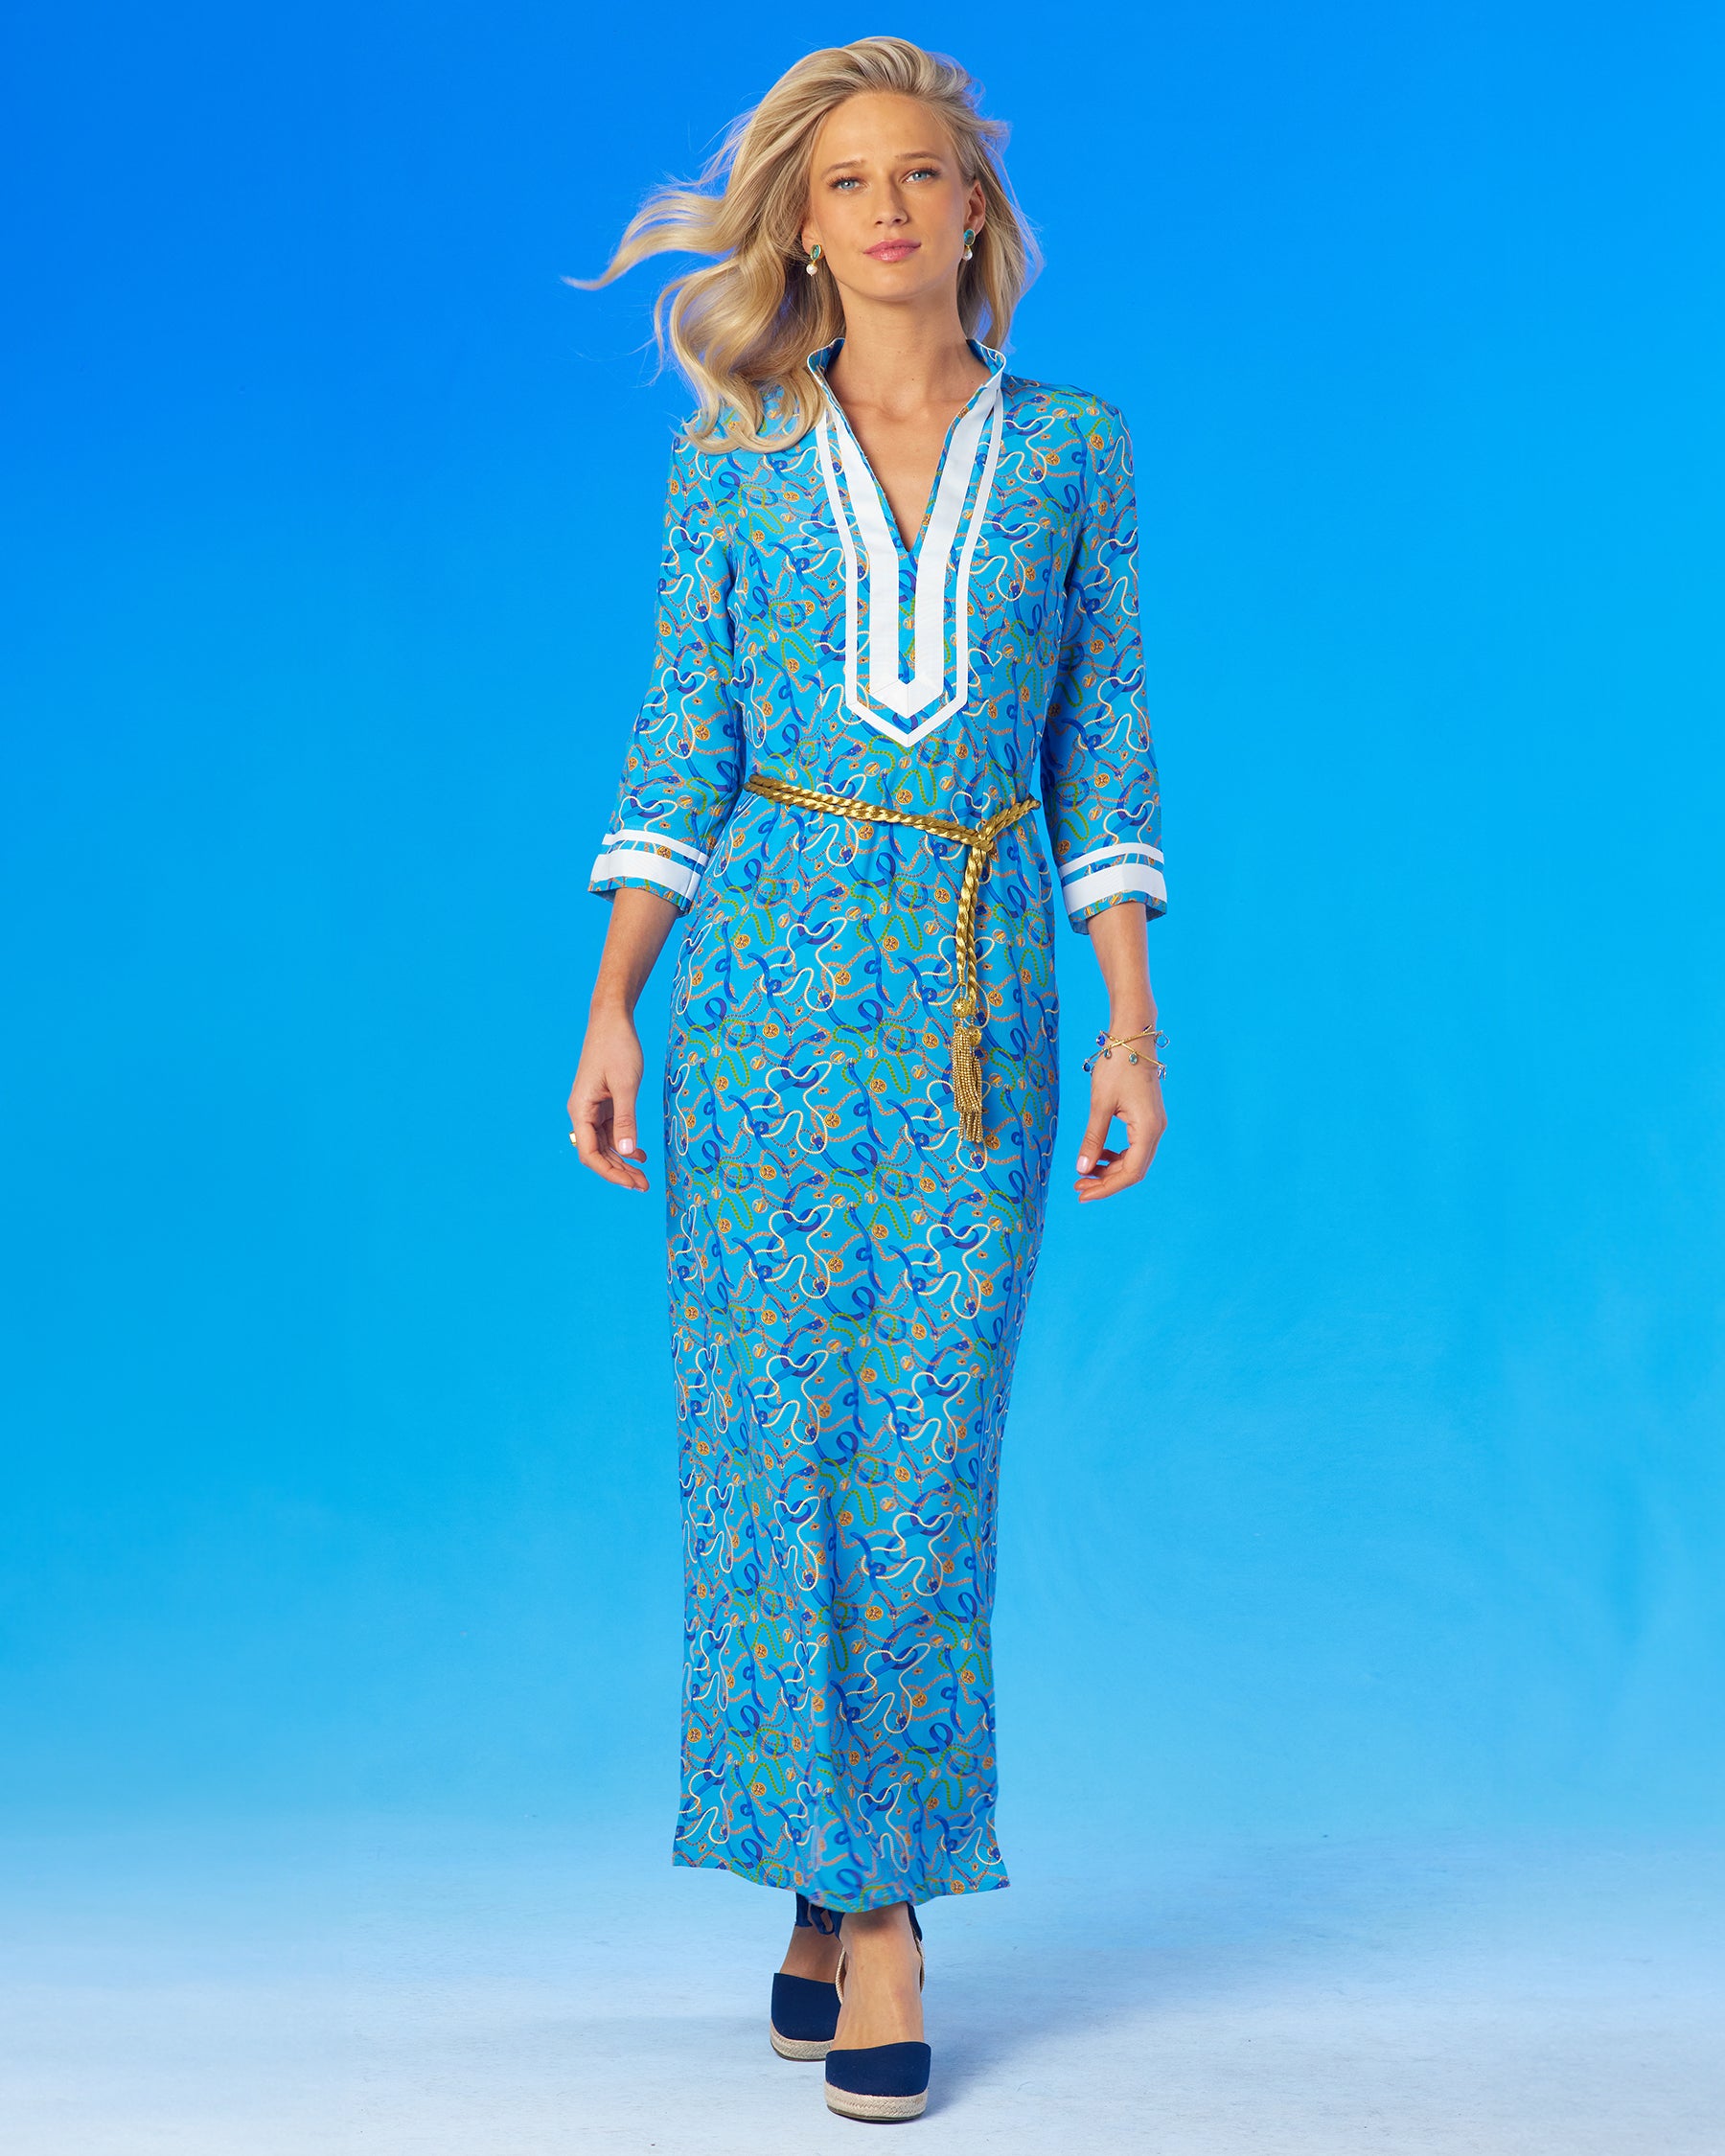 Capri Long Tunic Dress in Nautical Motifs worn with the waist cinched with the Artemis Rope Belt in Gold Beading